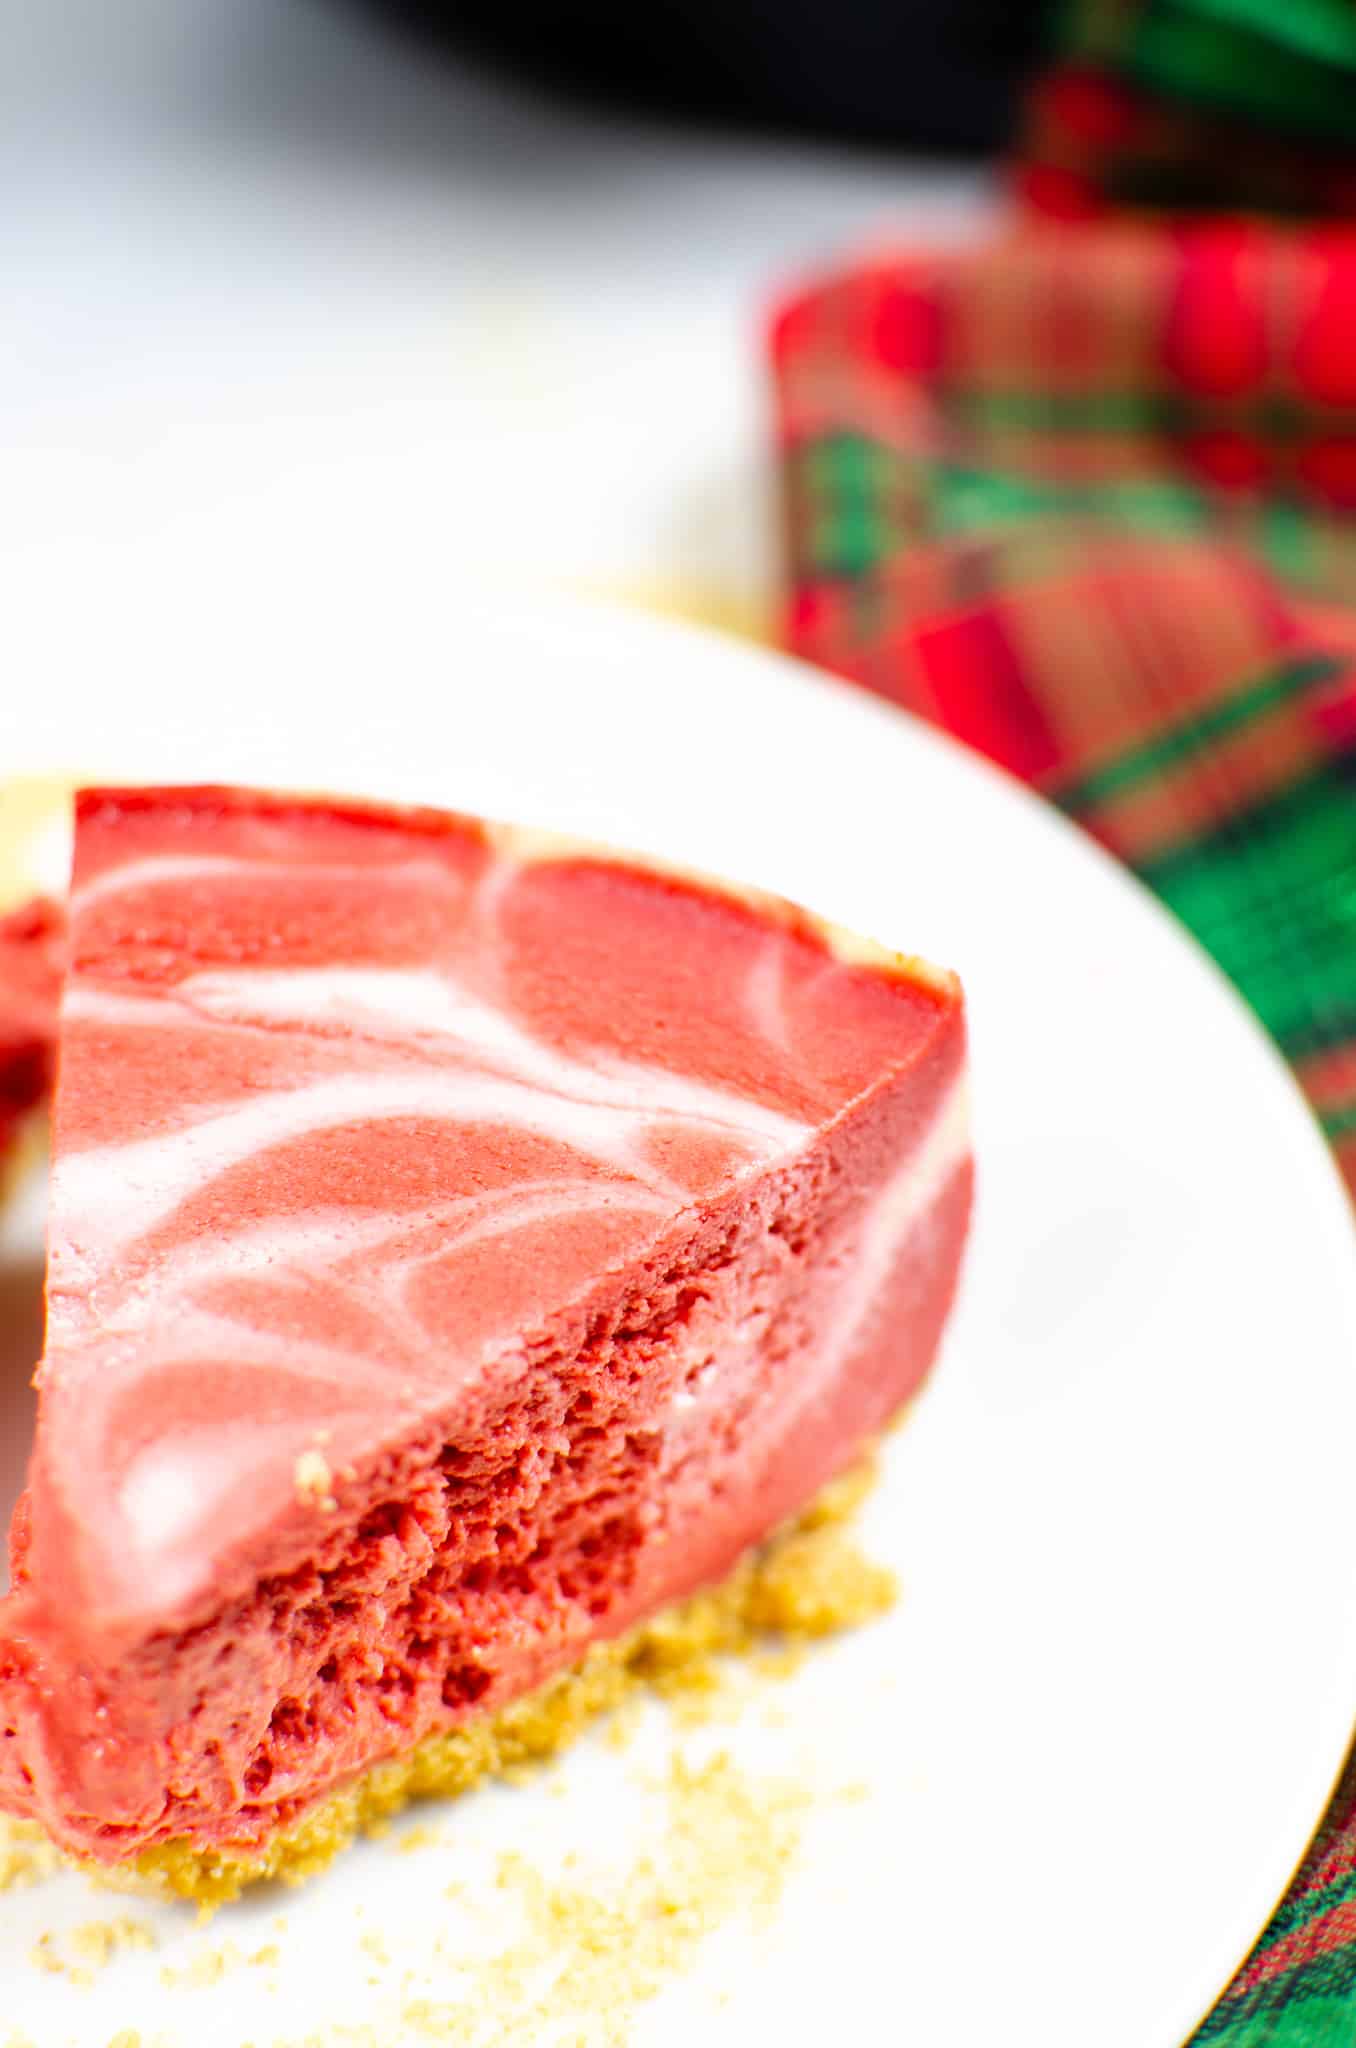 Instant Pot Cheesecake on white plate with red and green plaid napkin